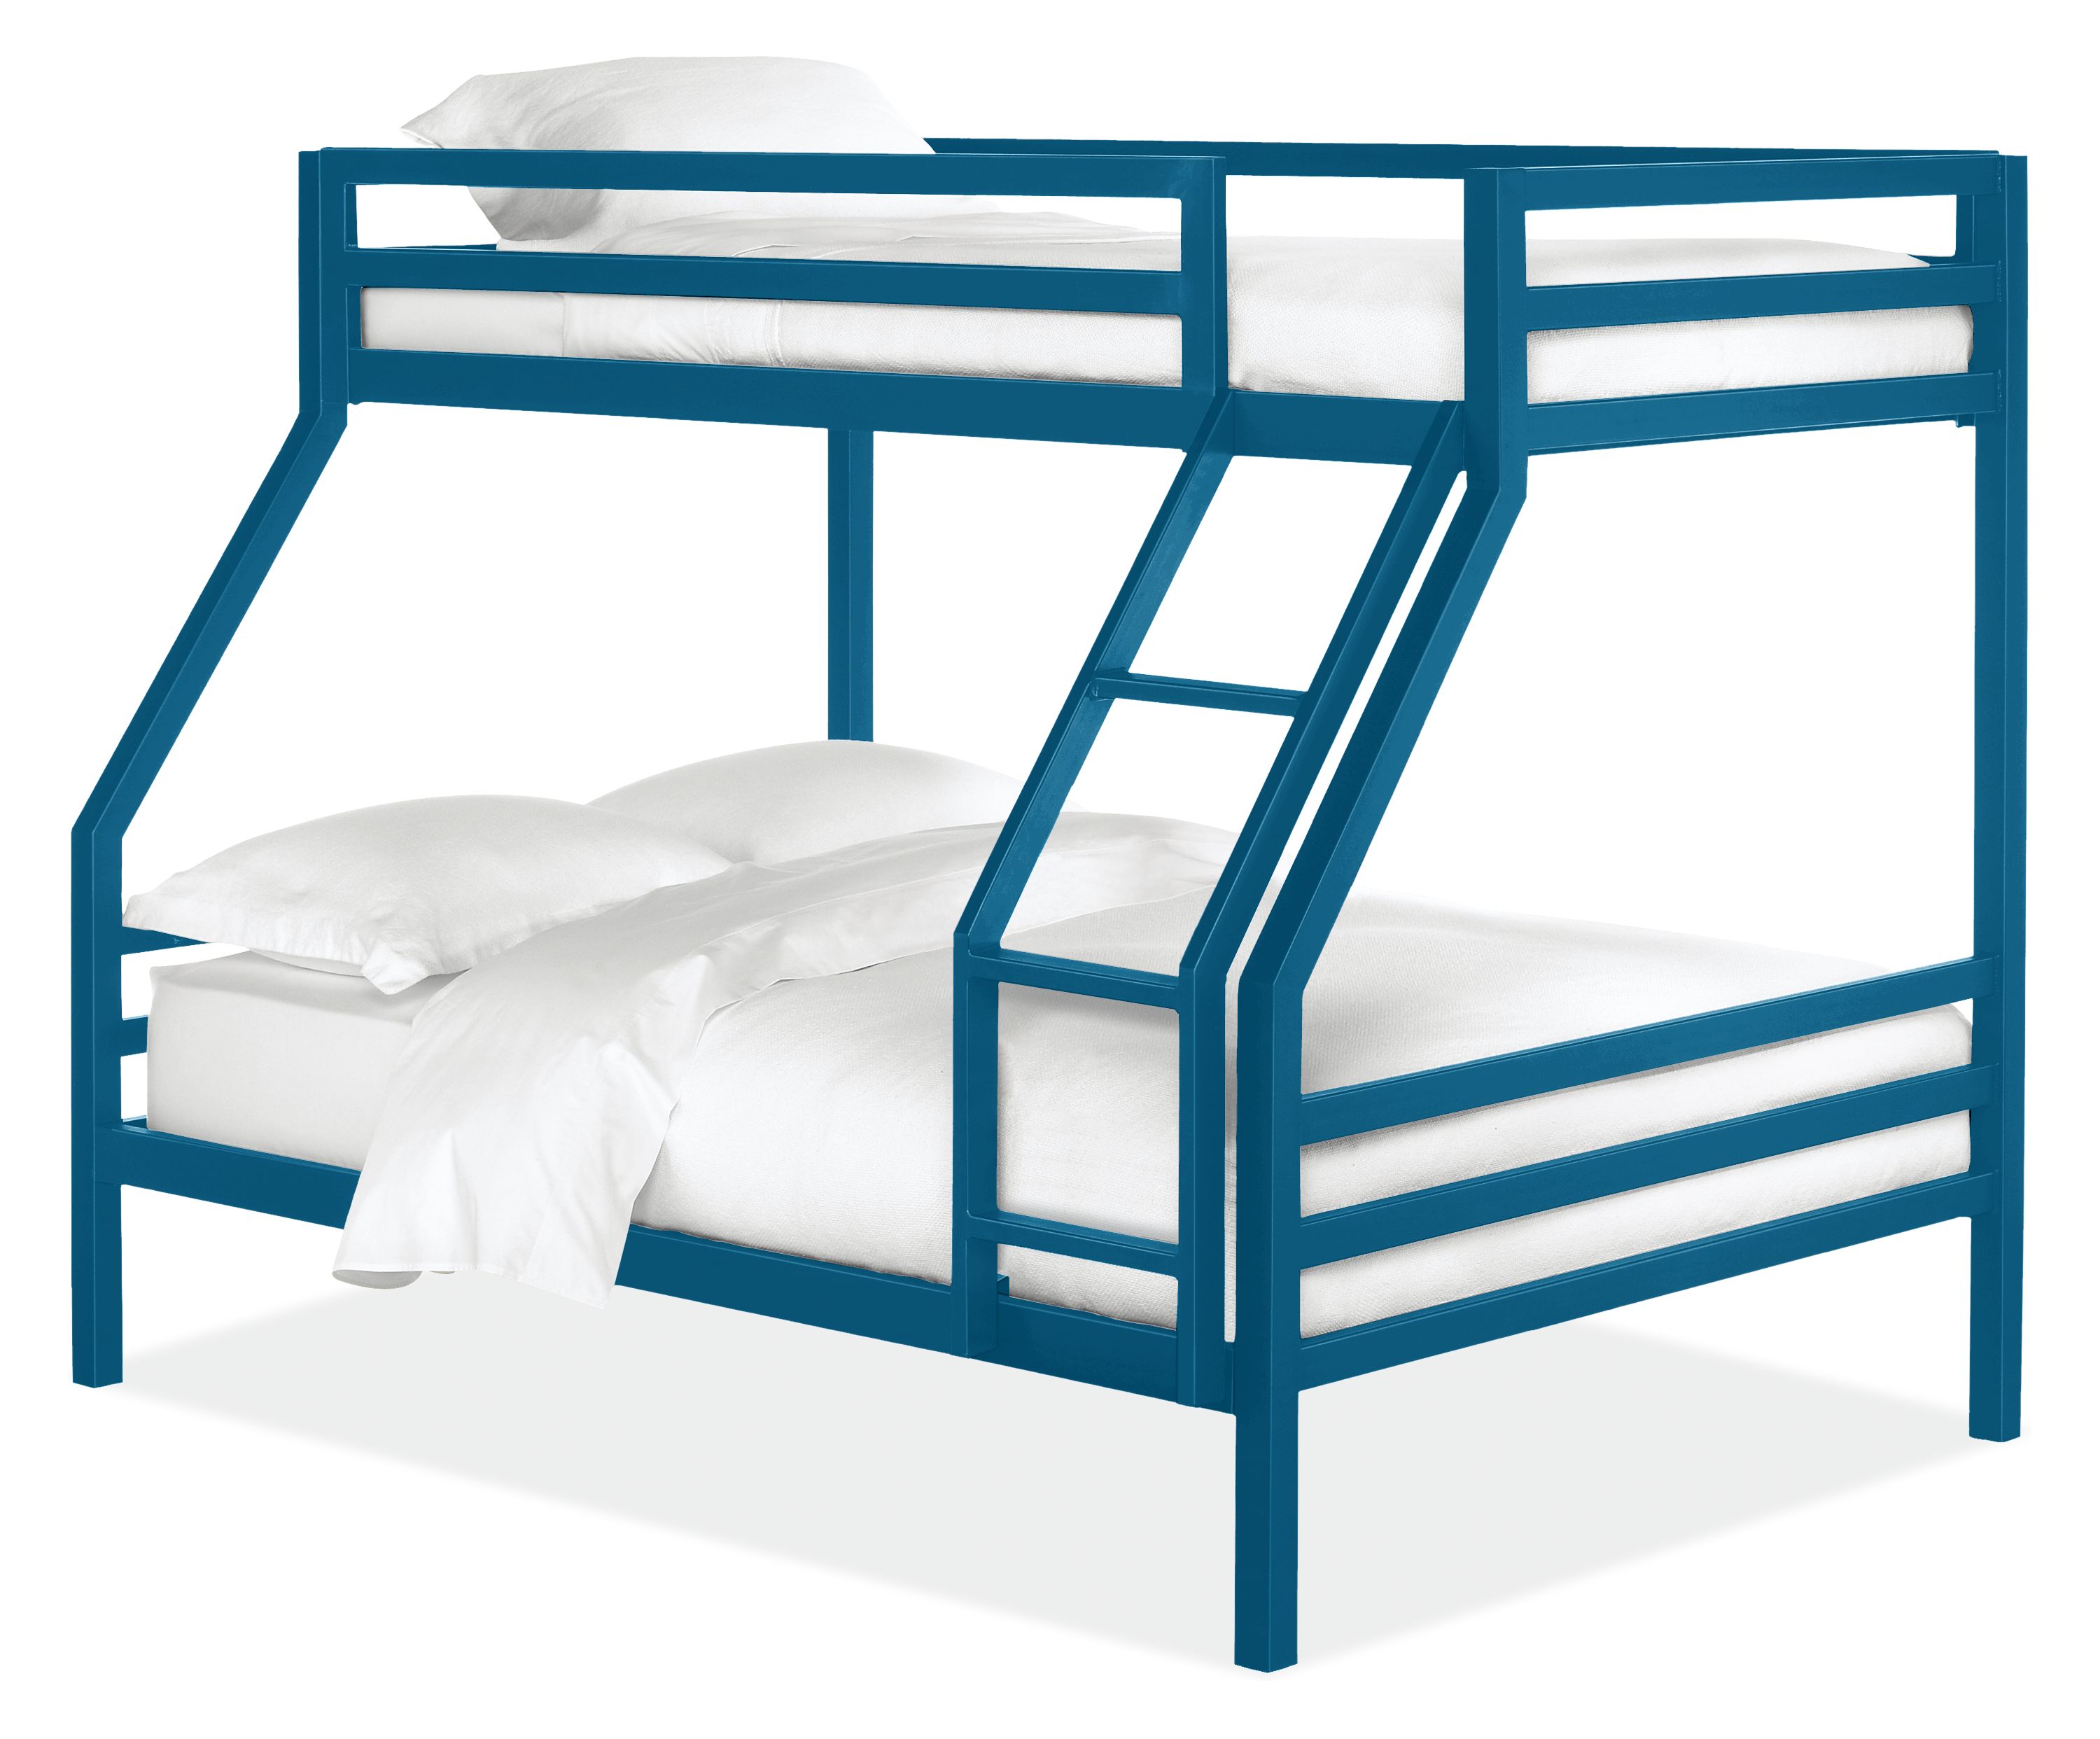 Fort Bunk Beds In Colors Twin Over, Kids Full Bunk Beds